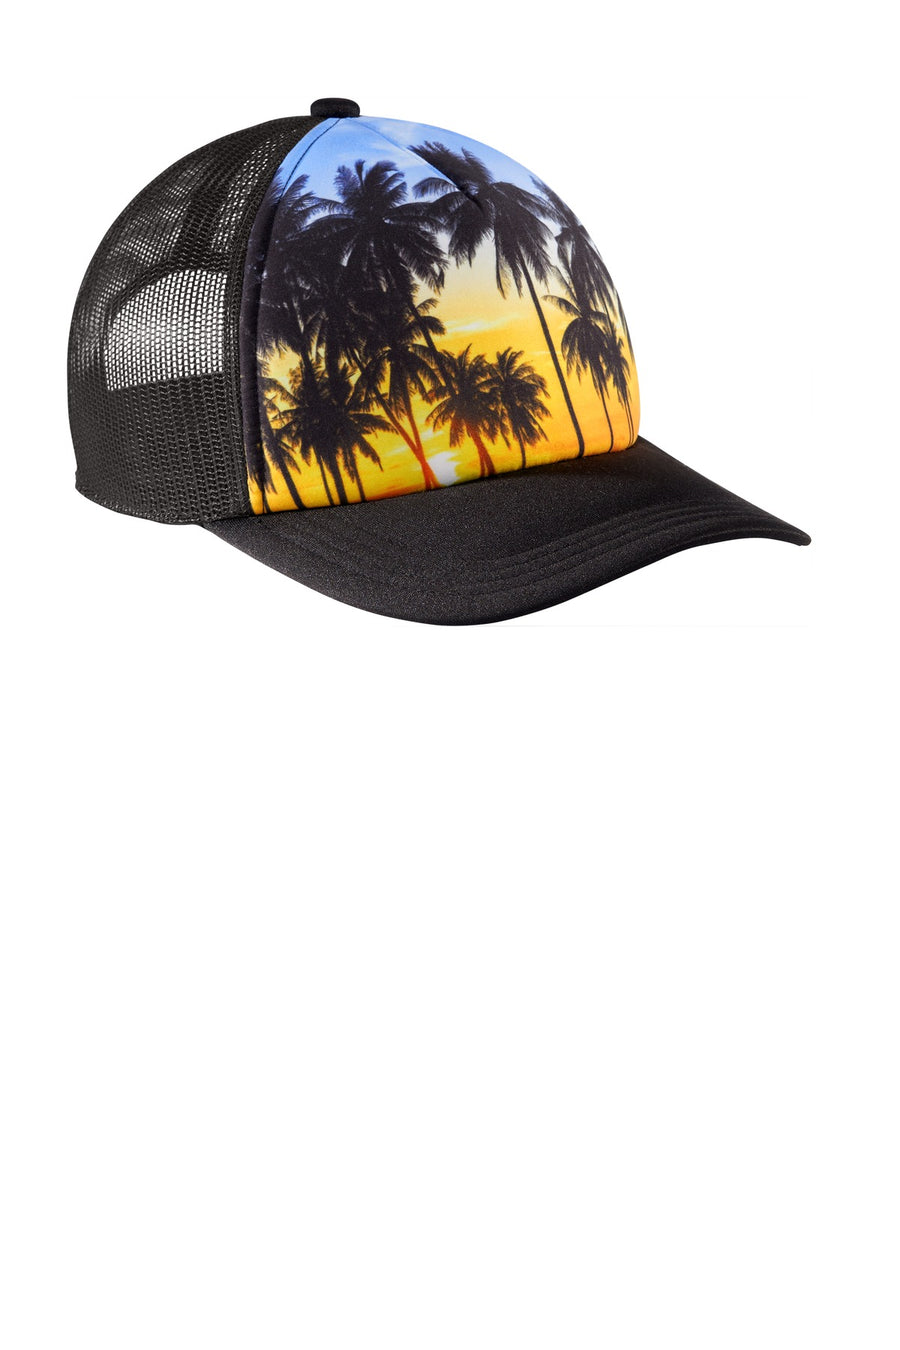 C950-Palm Trees-front_flat